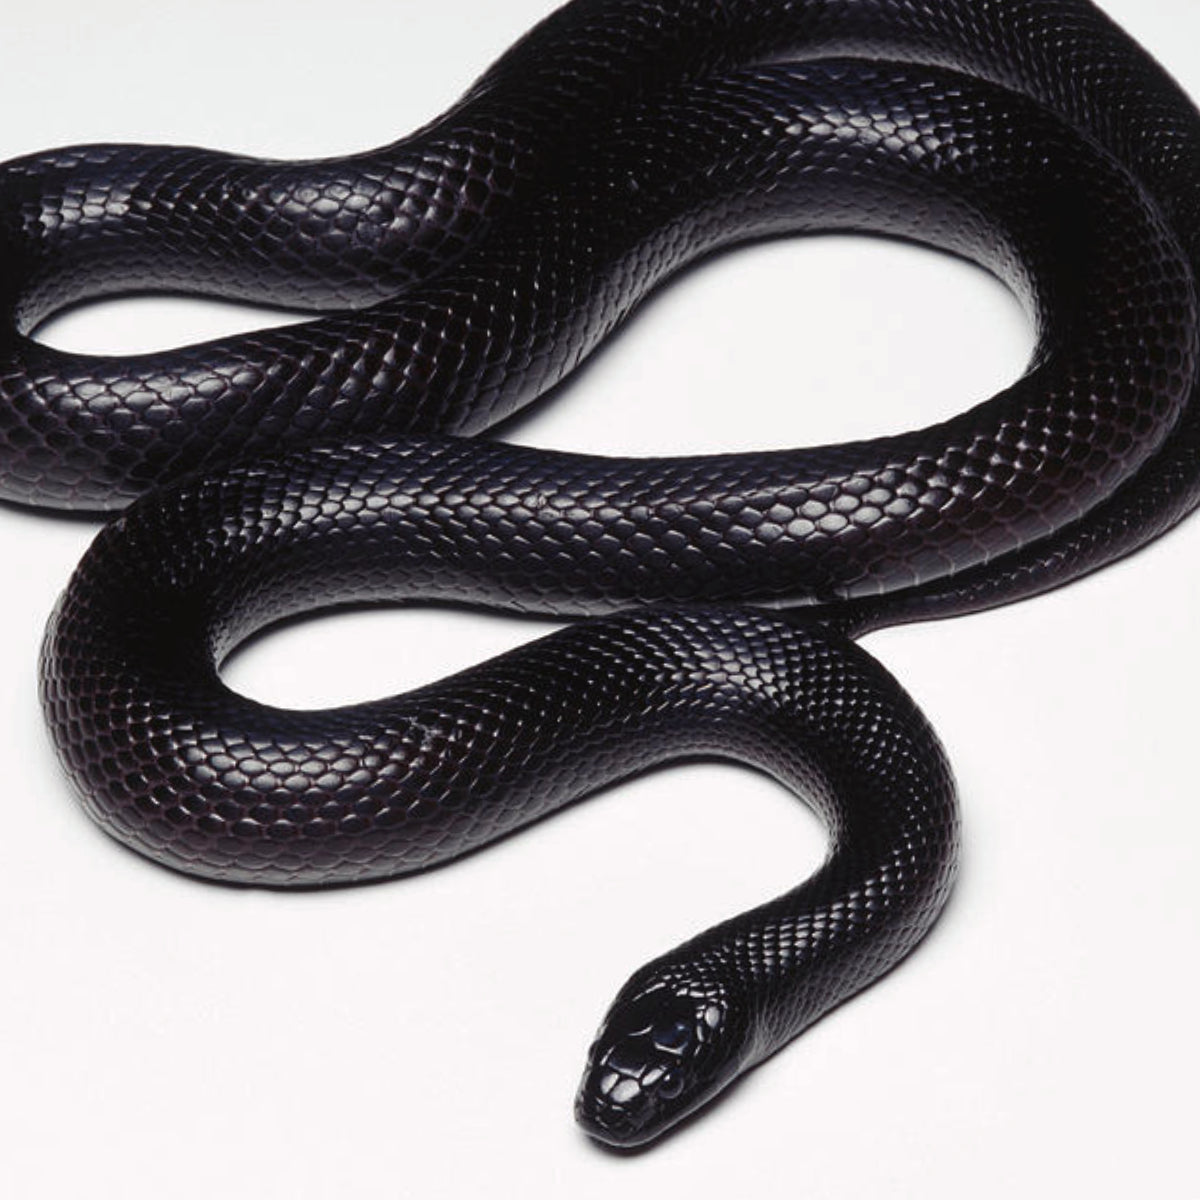 Mexican Black Kingsnakes for Sale image photo